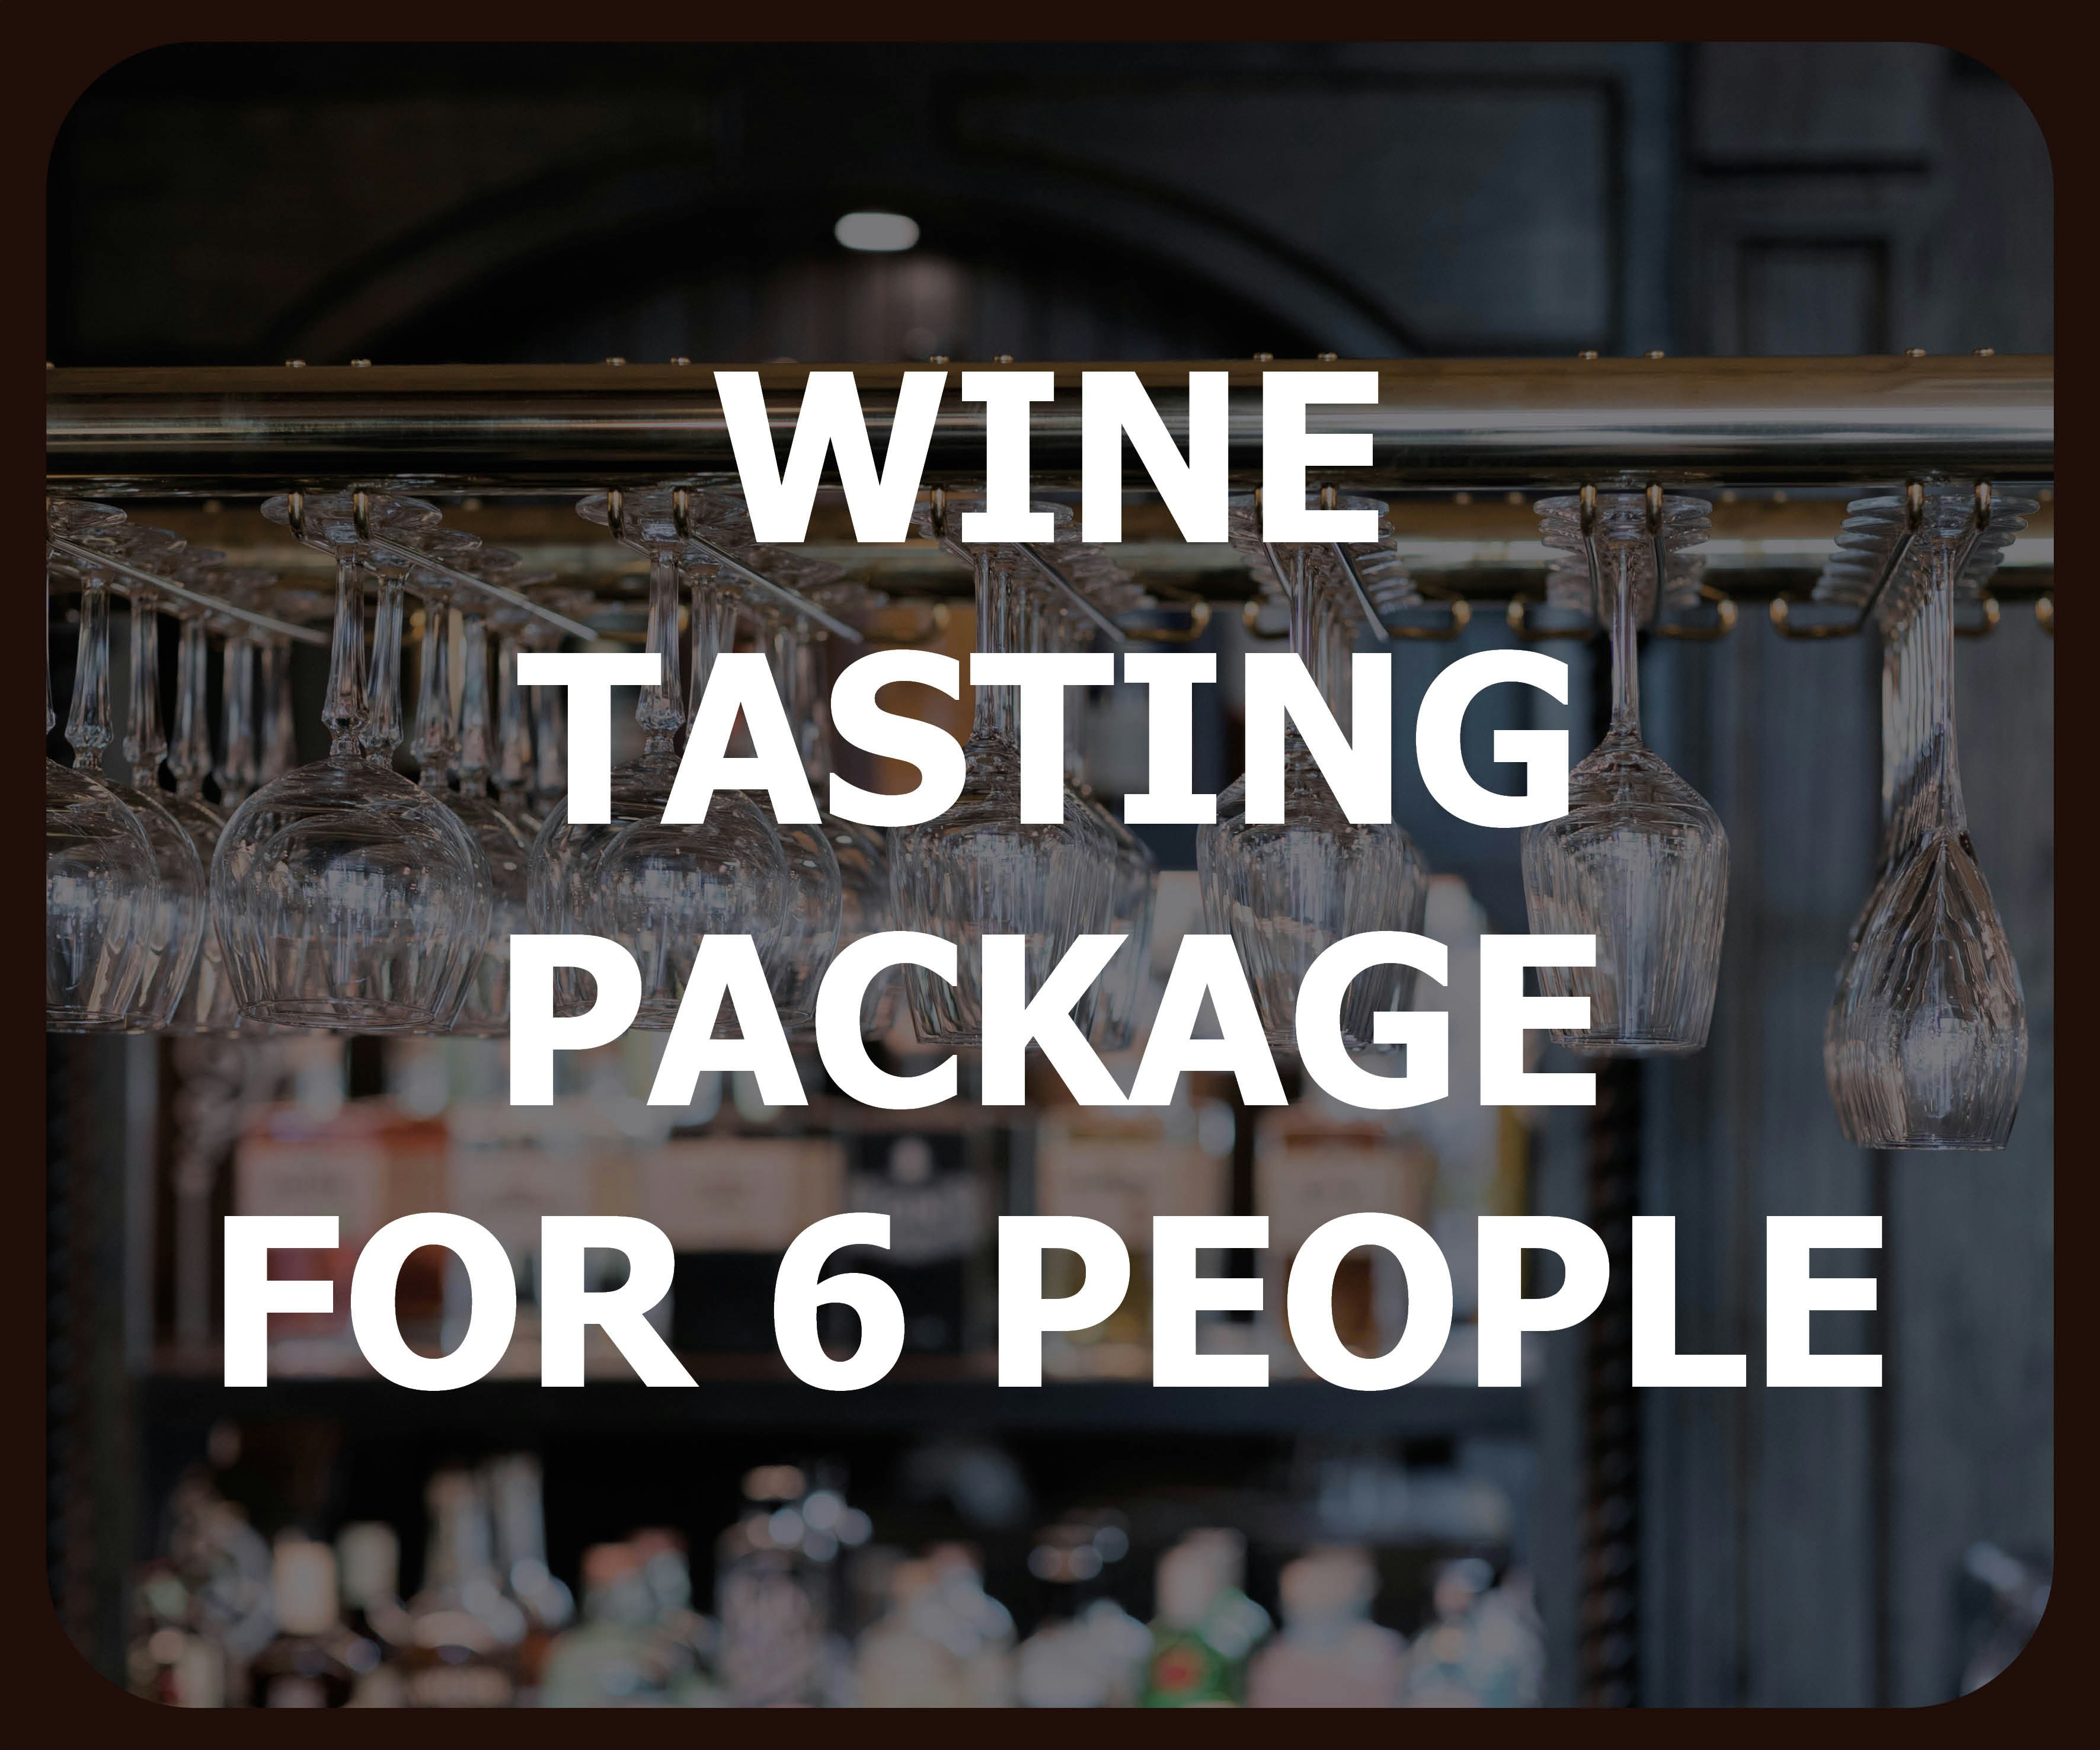 Wine seminar at the Willow Yard Pub - package for 6 people